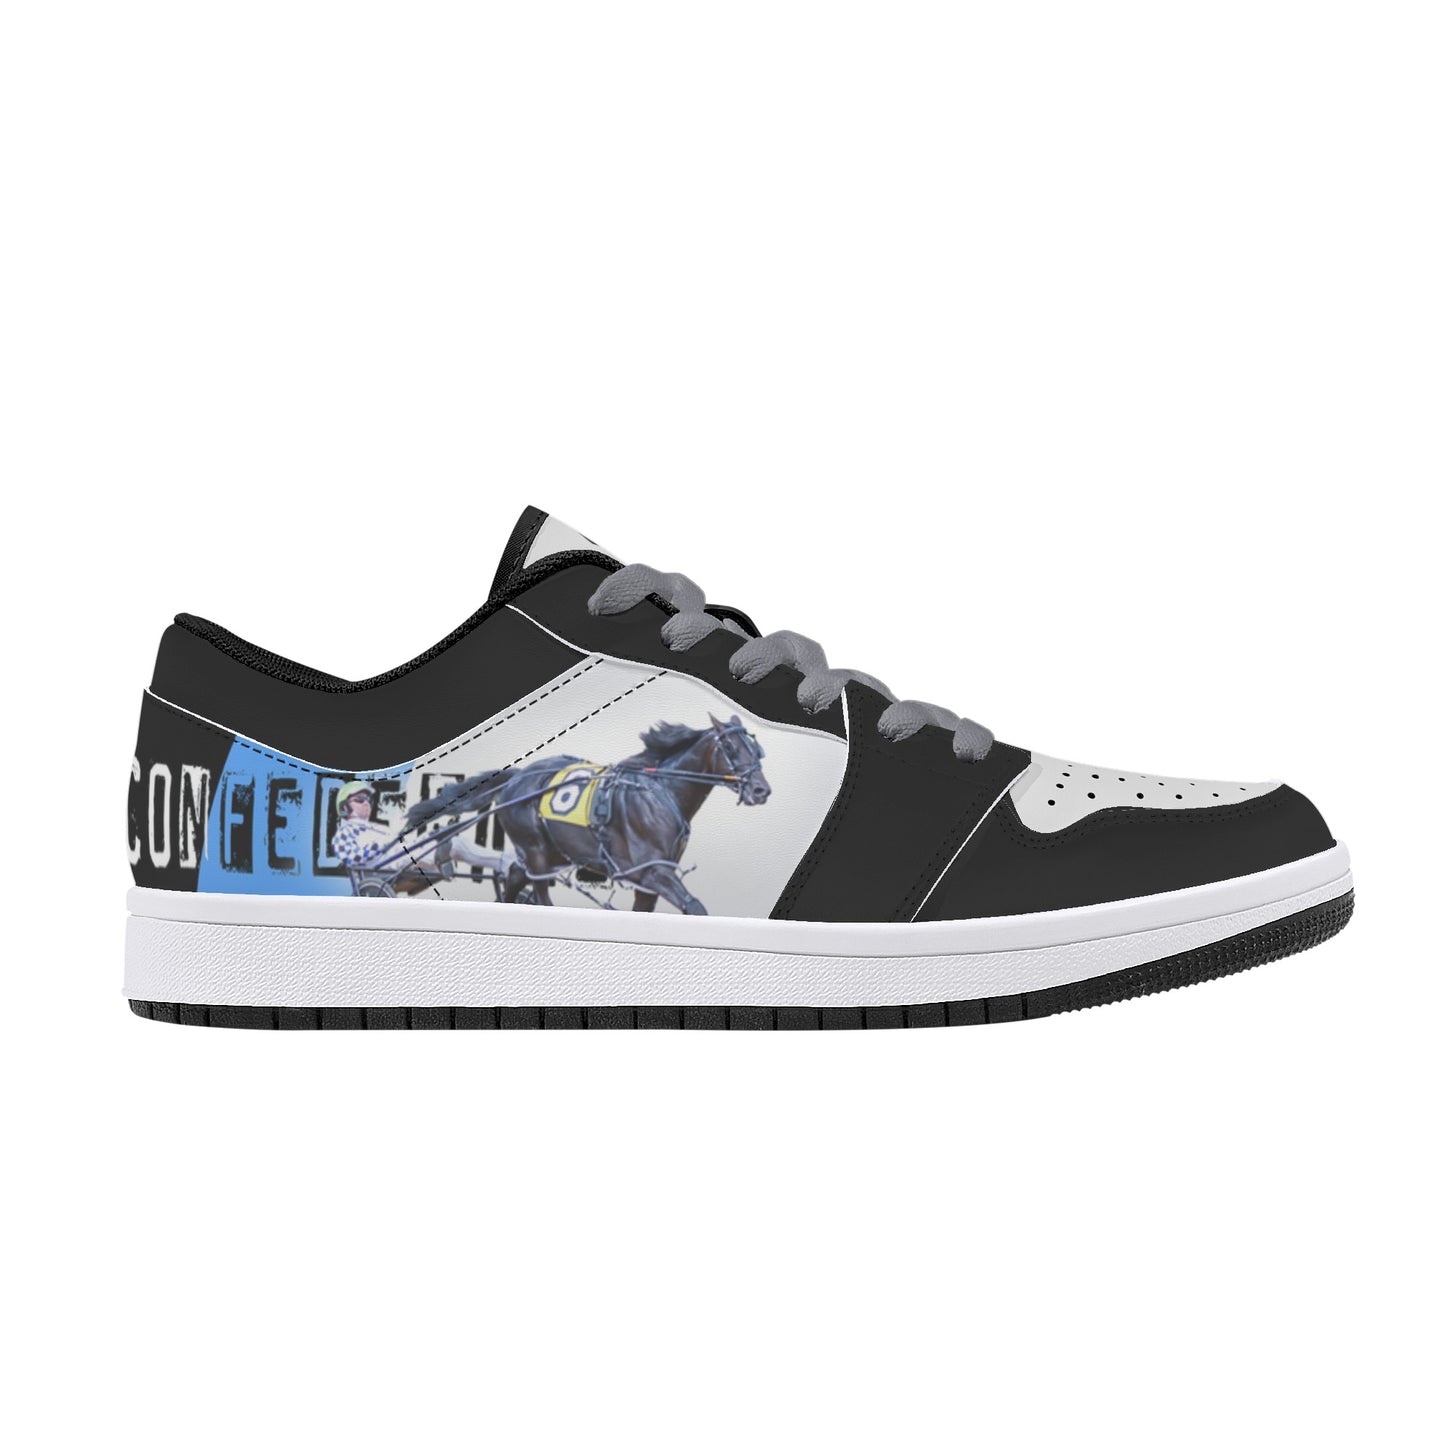 CONFEDERATE Mens Low Top Leather Sneakers